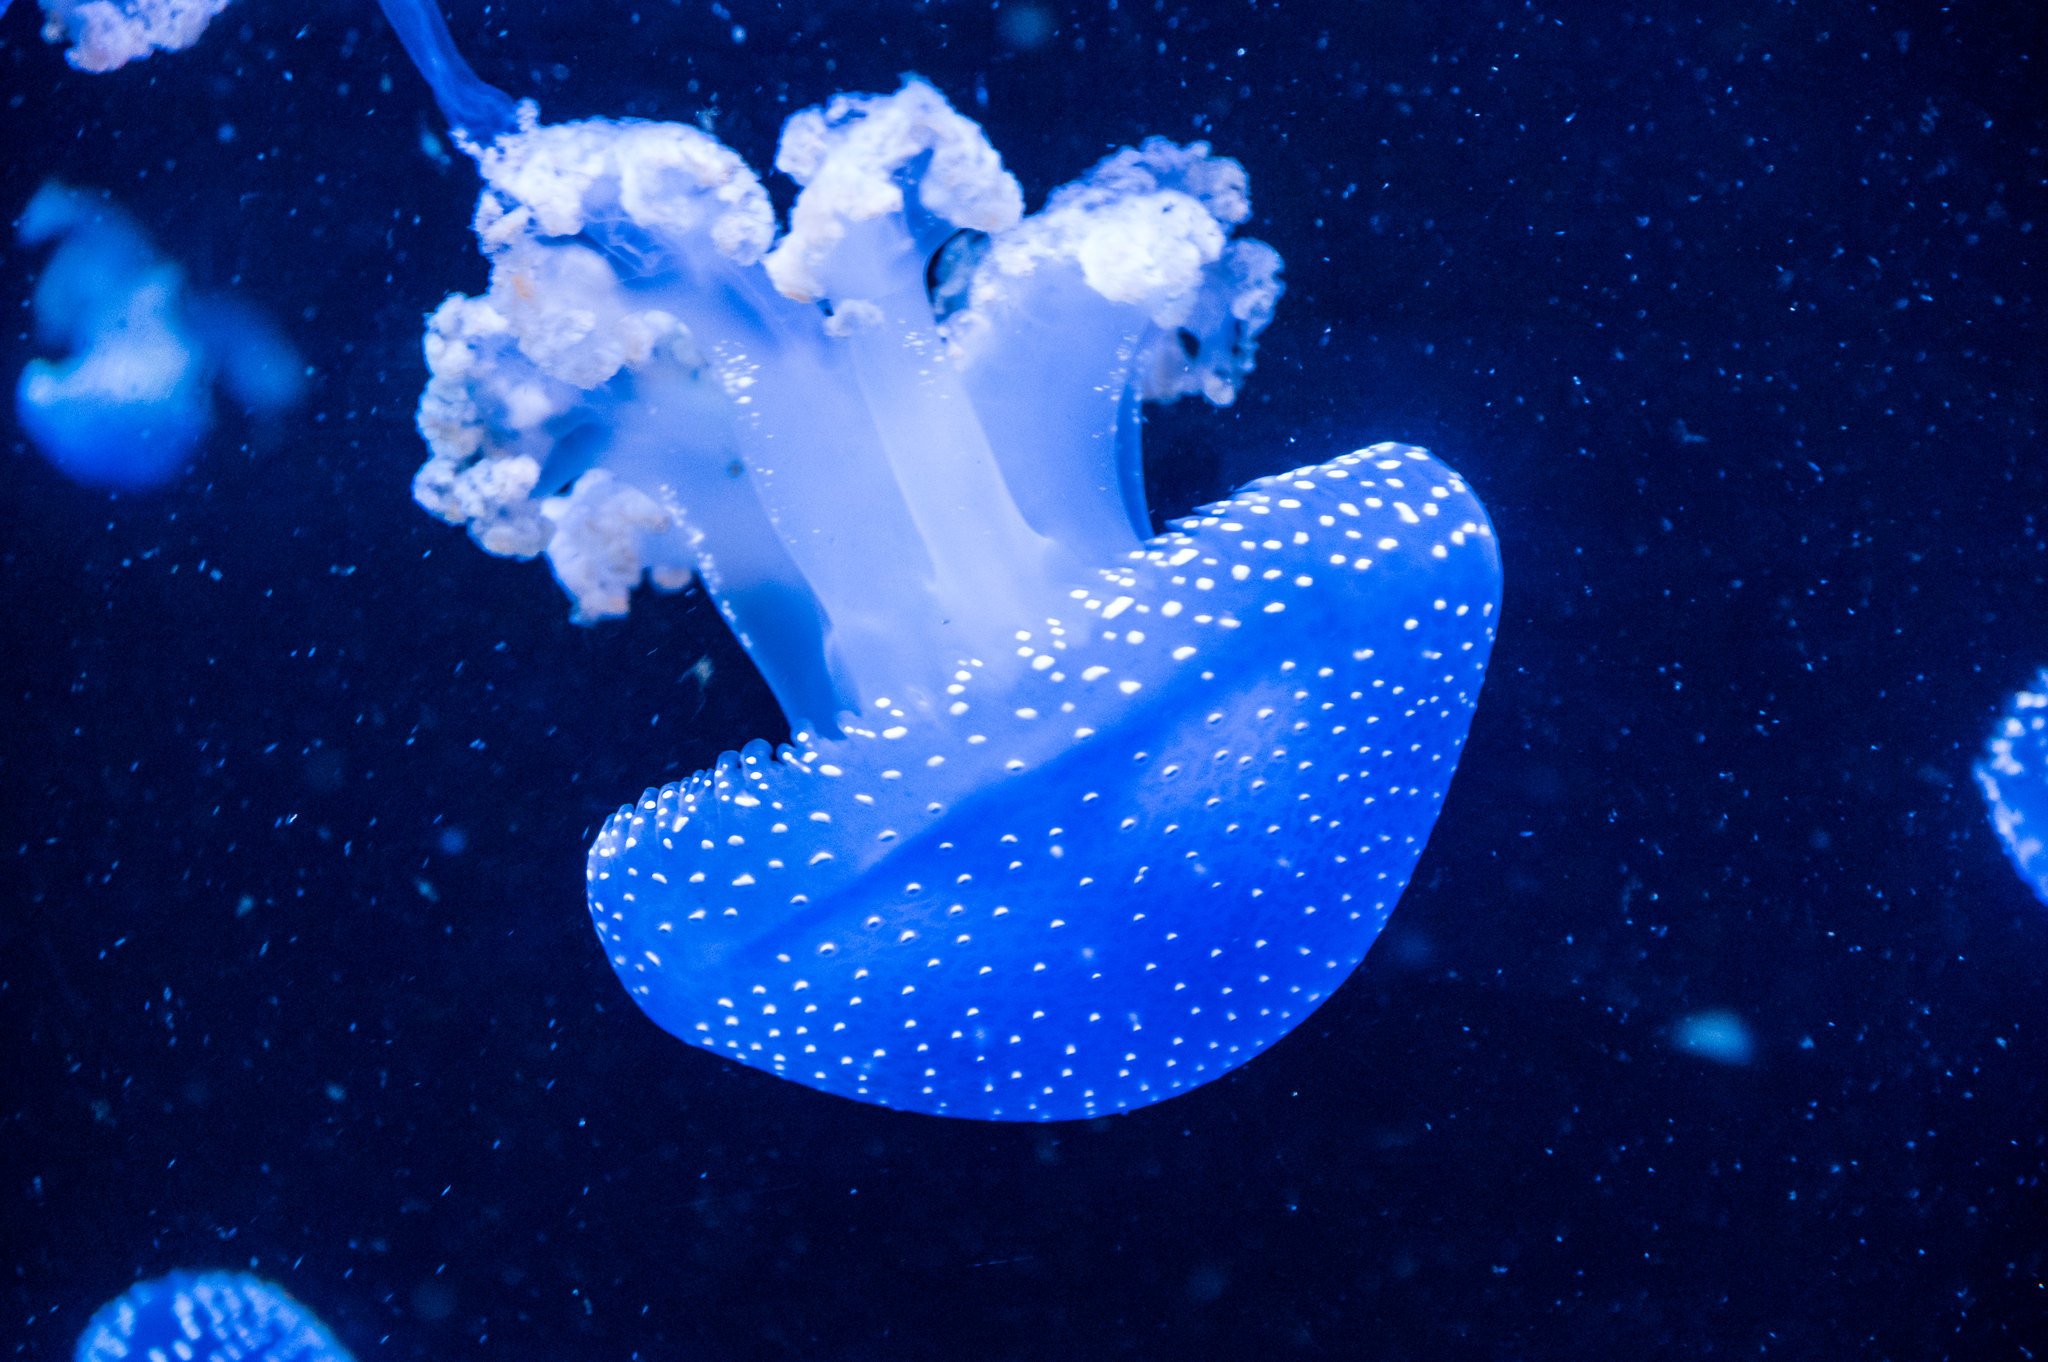 https://www.climatewatch.org.au/images/Species/Marine/SpottedJelly/Spotted-Jellyfish-Dustin-Hackert-FlickrCC-2.jpg